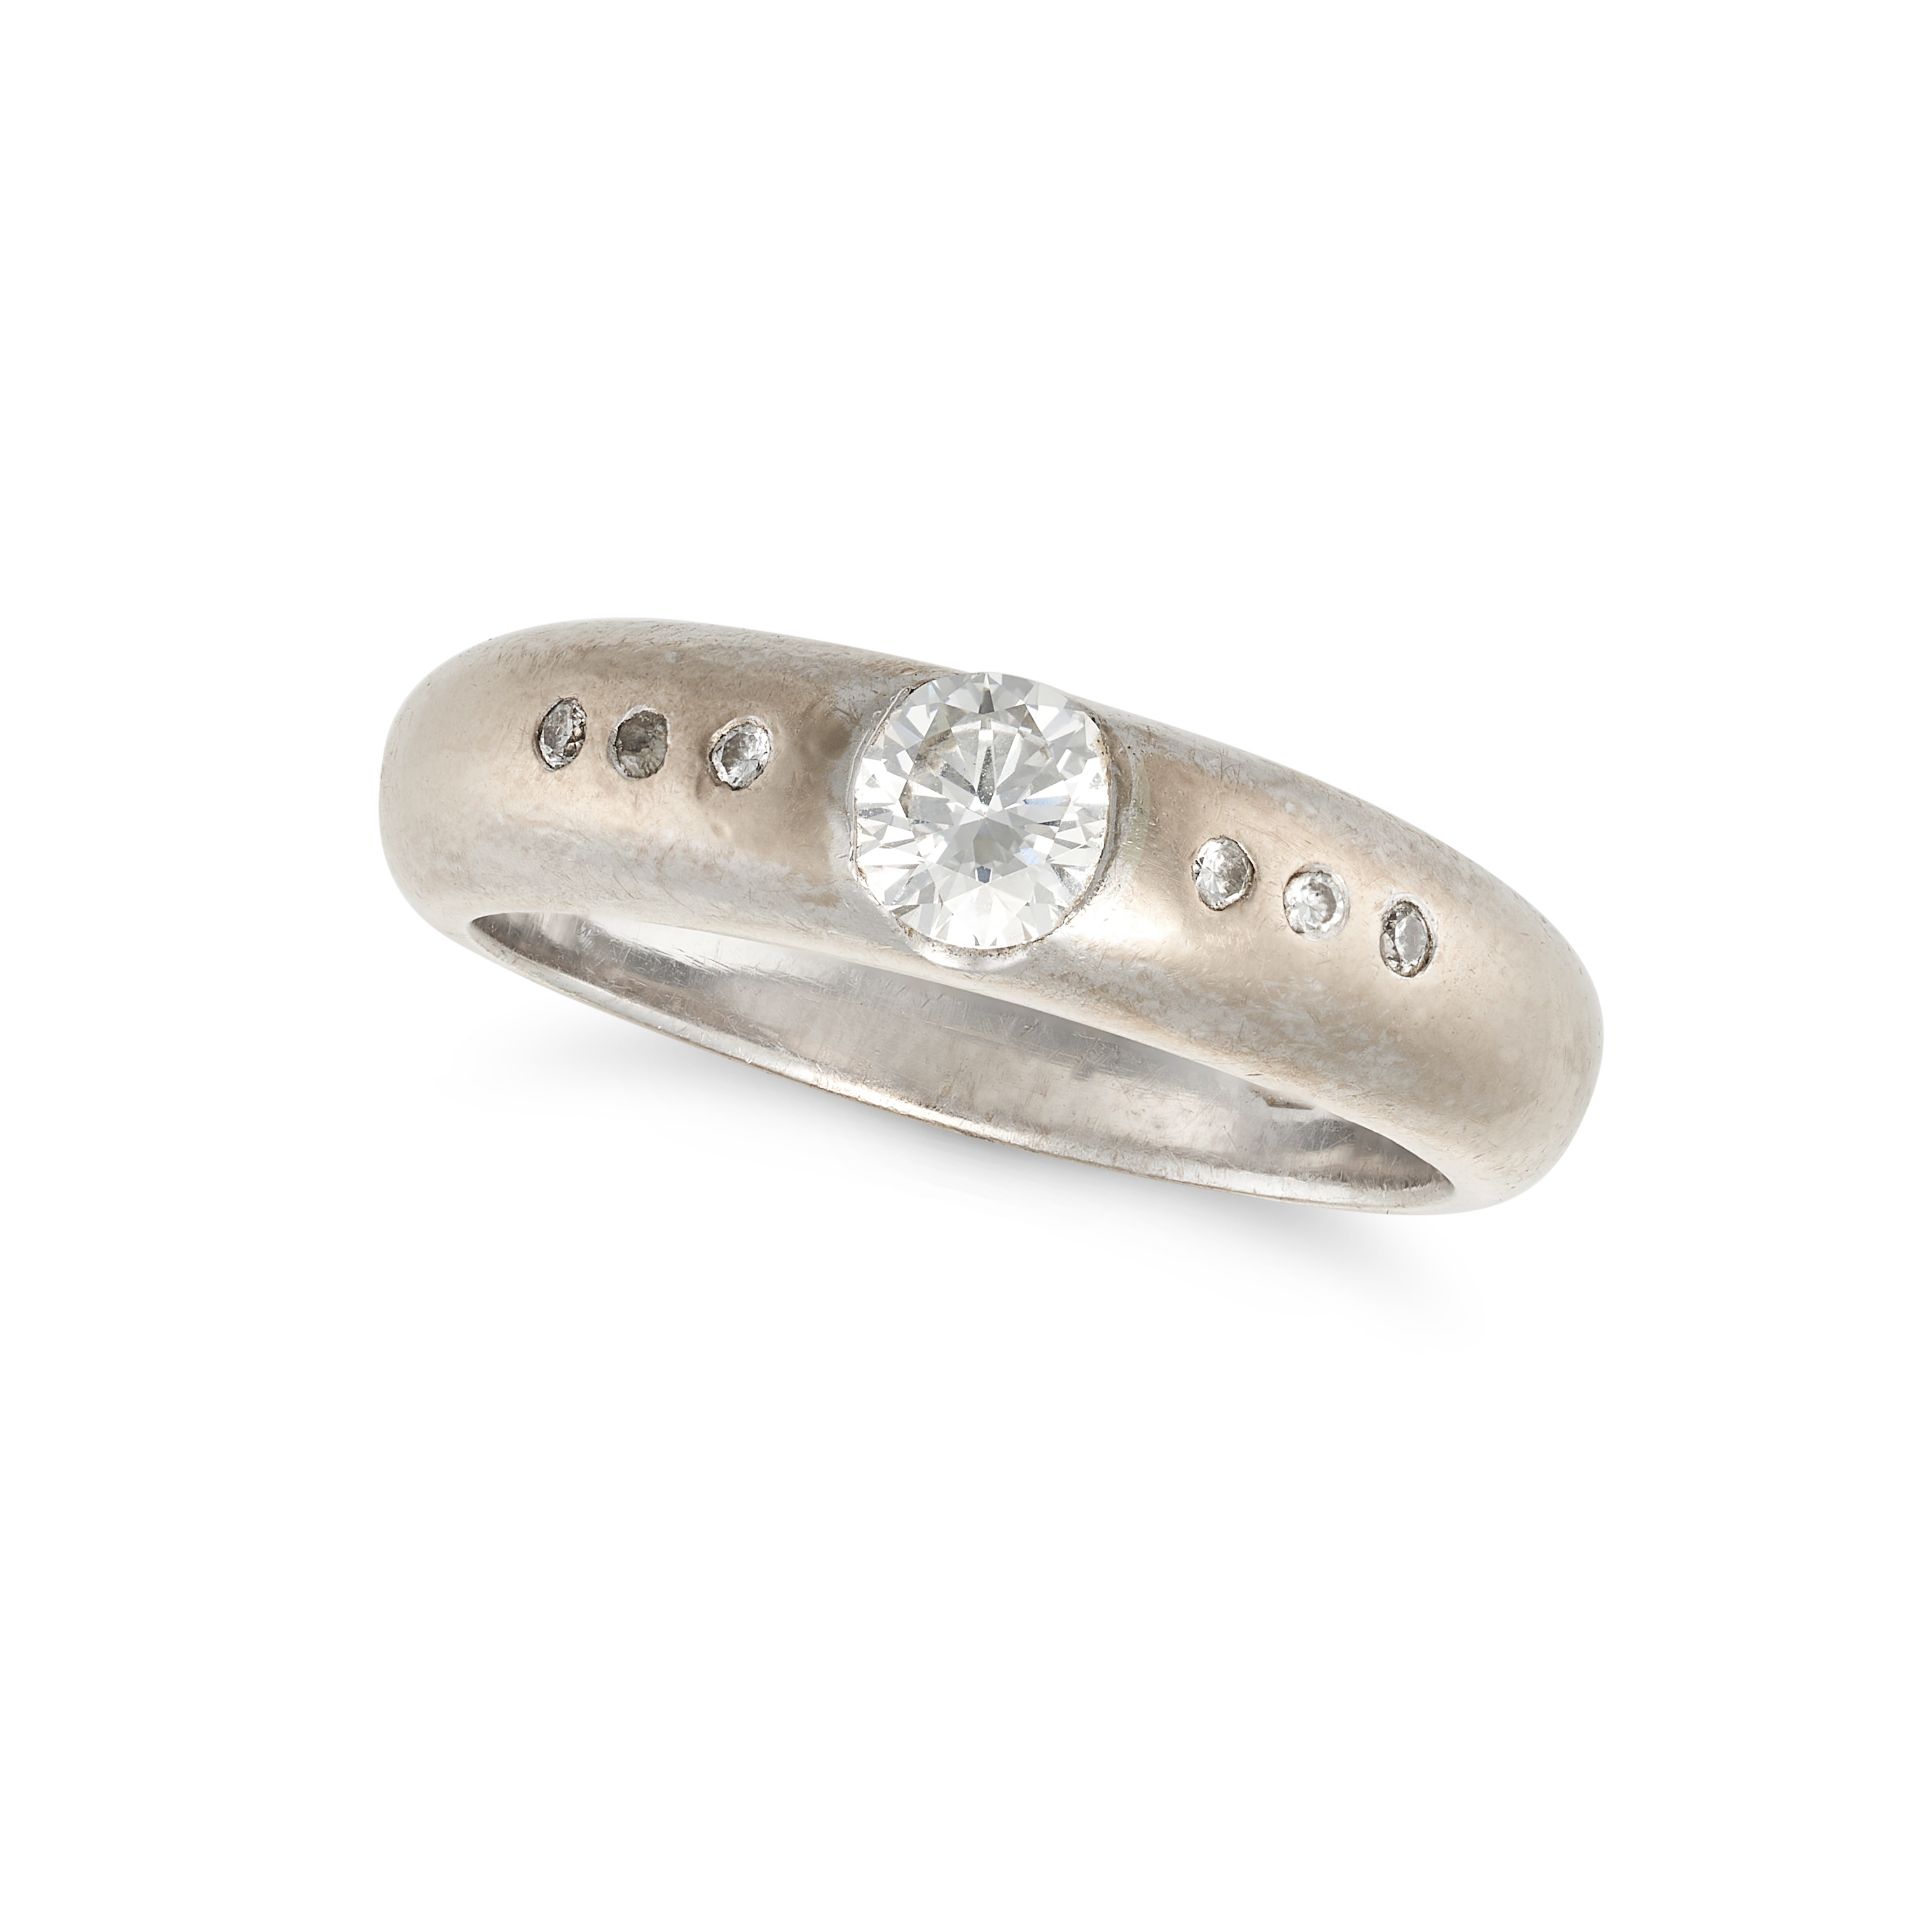 NO RESERVE - A DIAMOND BAND RING in 18ct white gold, set to the centre with a round brilliant cut...